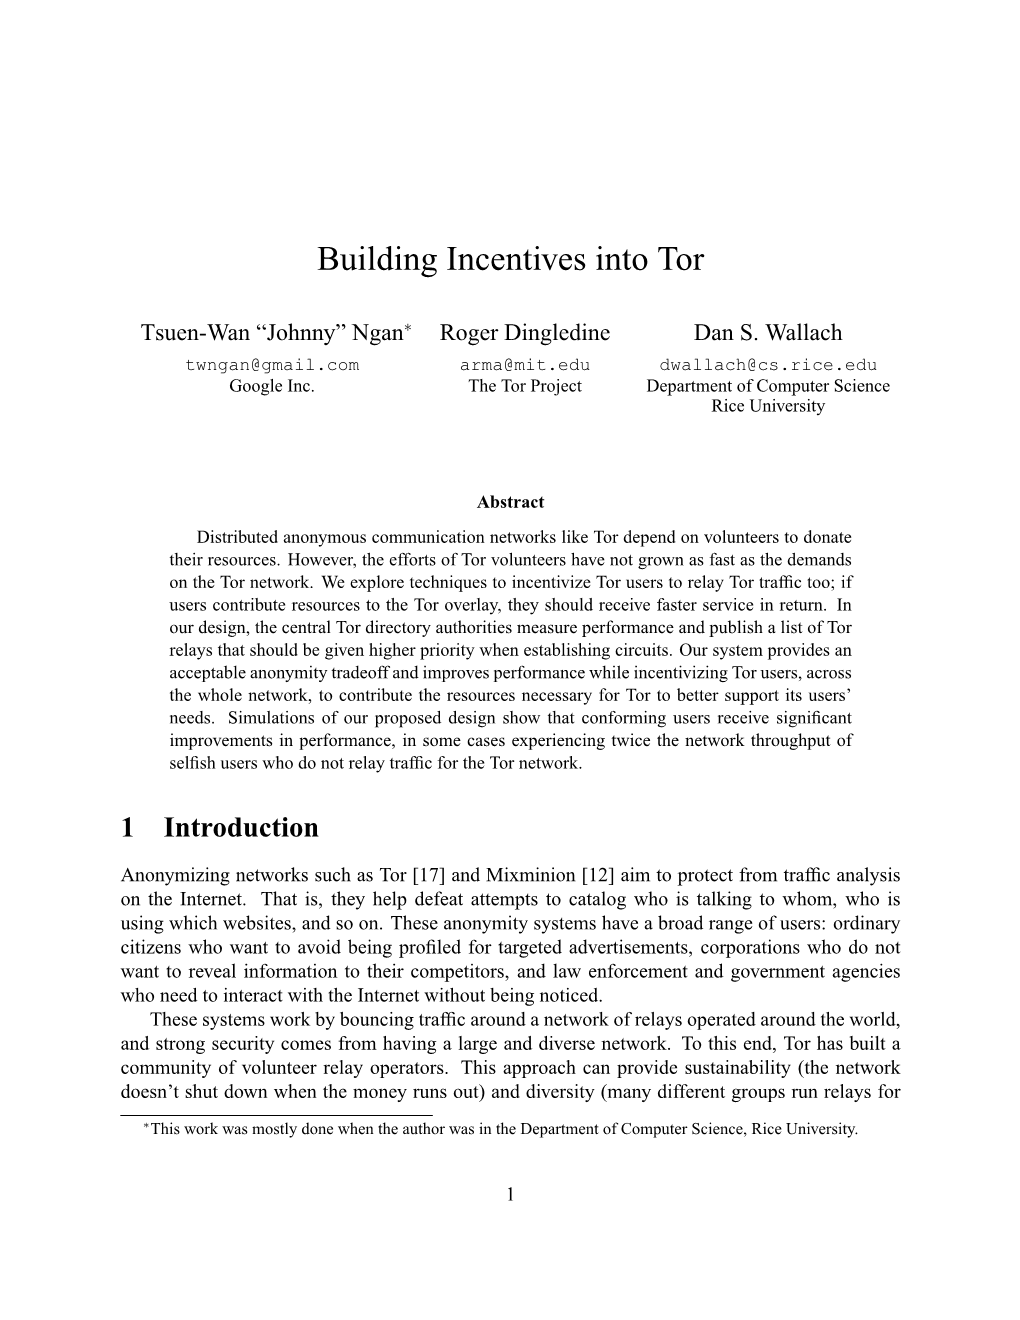 Building Incentives Into Tor